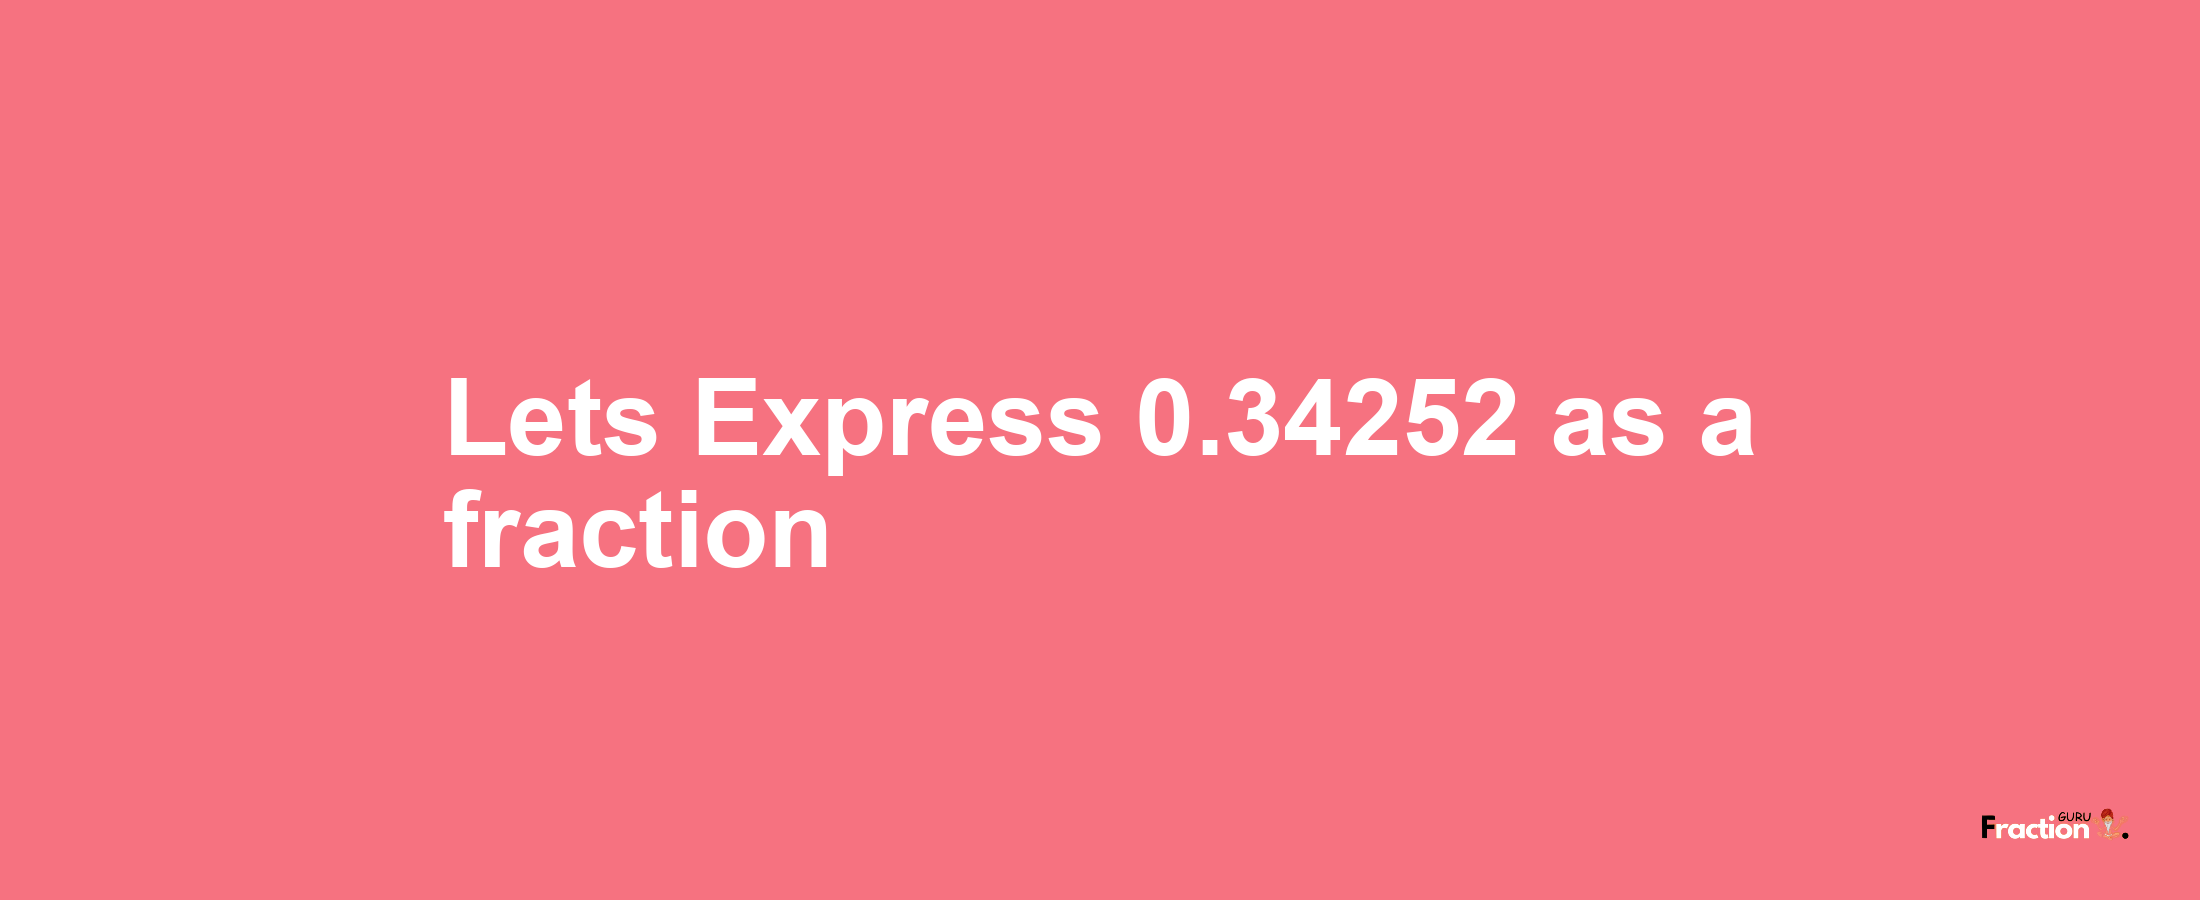 Lets Express 0.34252 as afraction